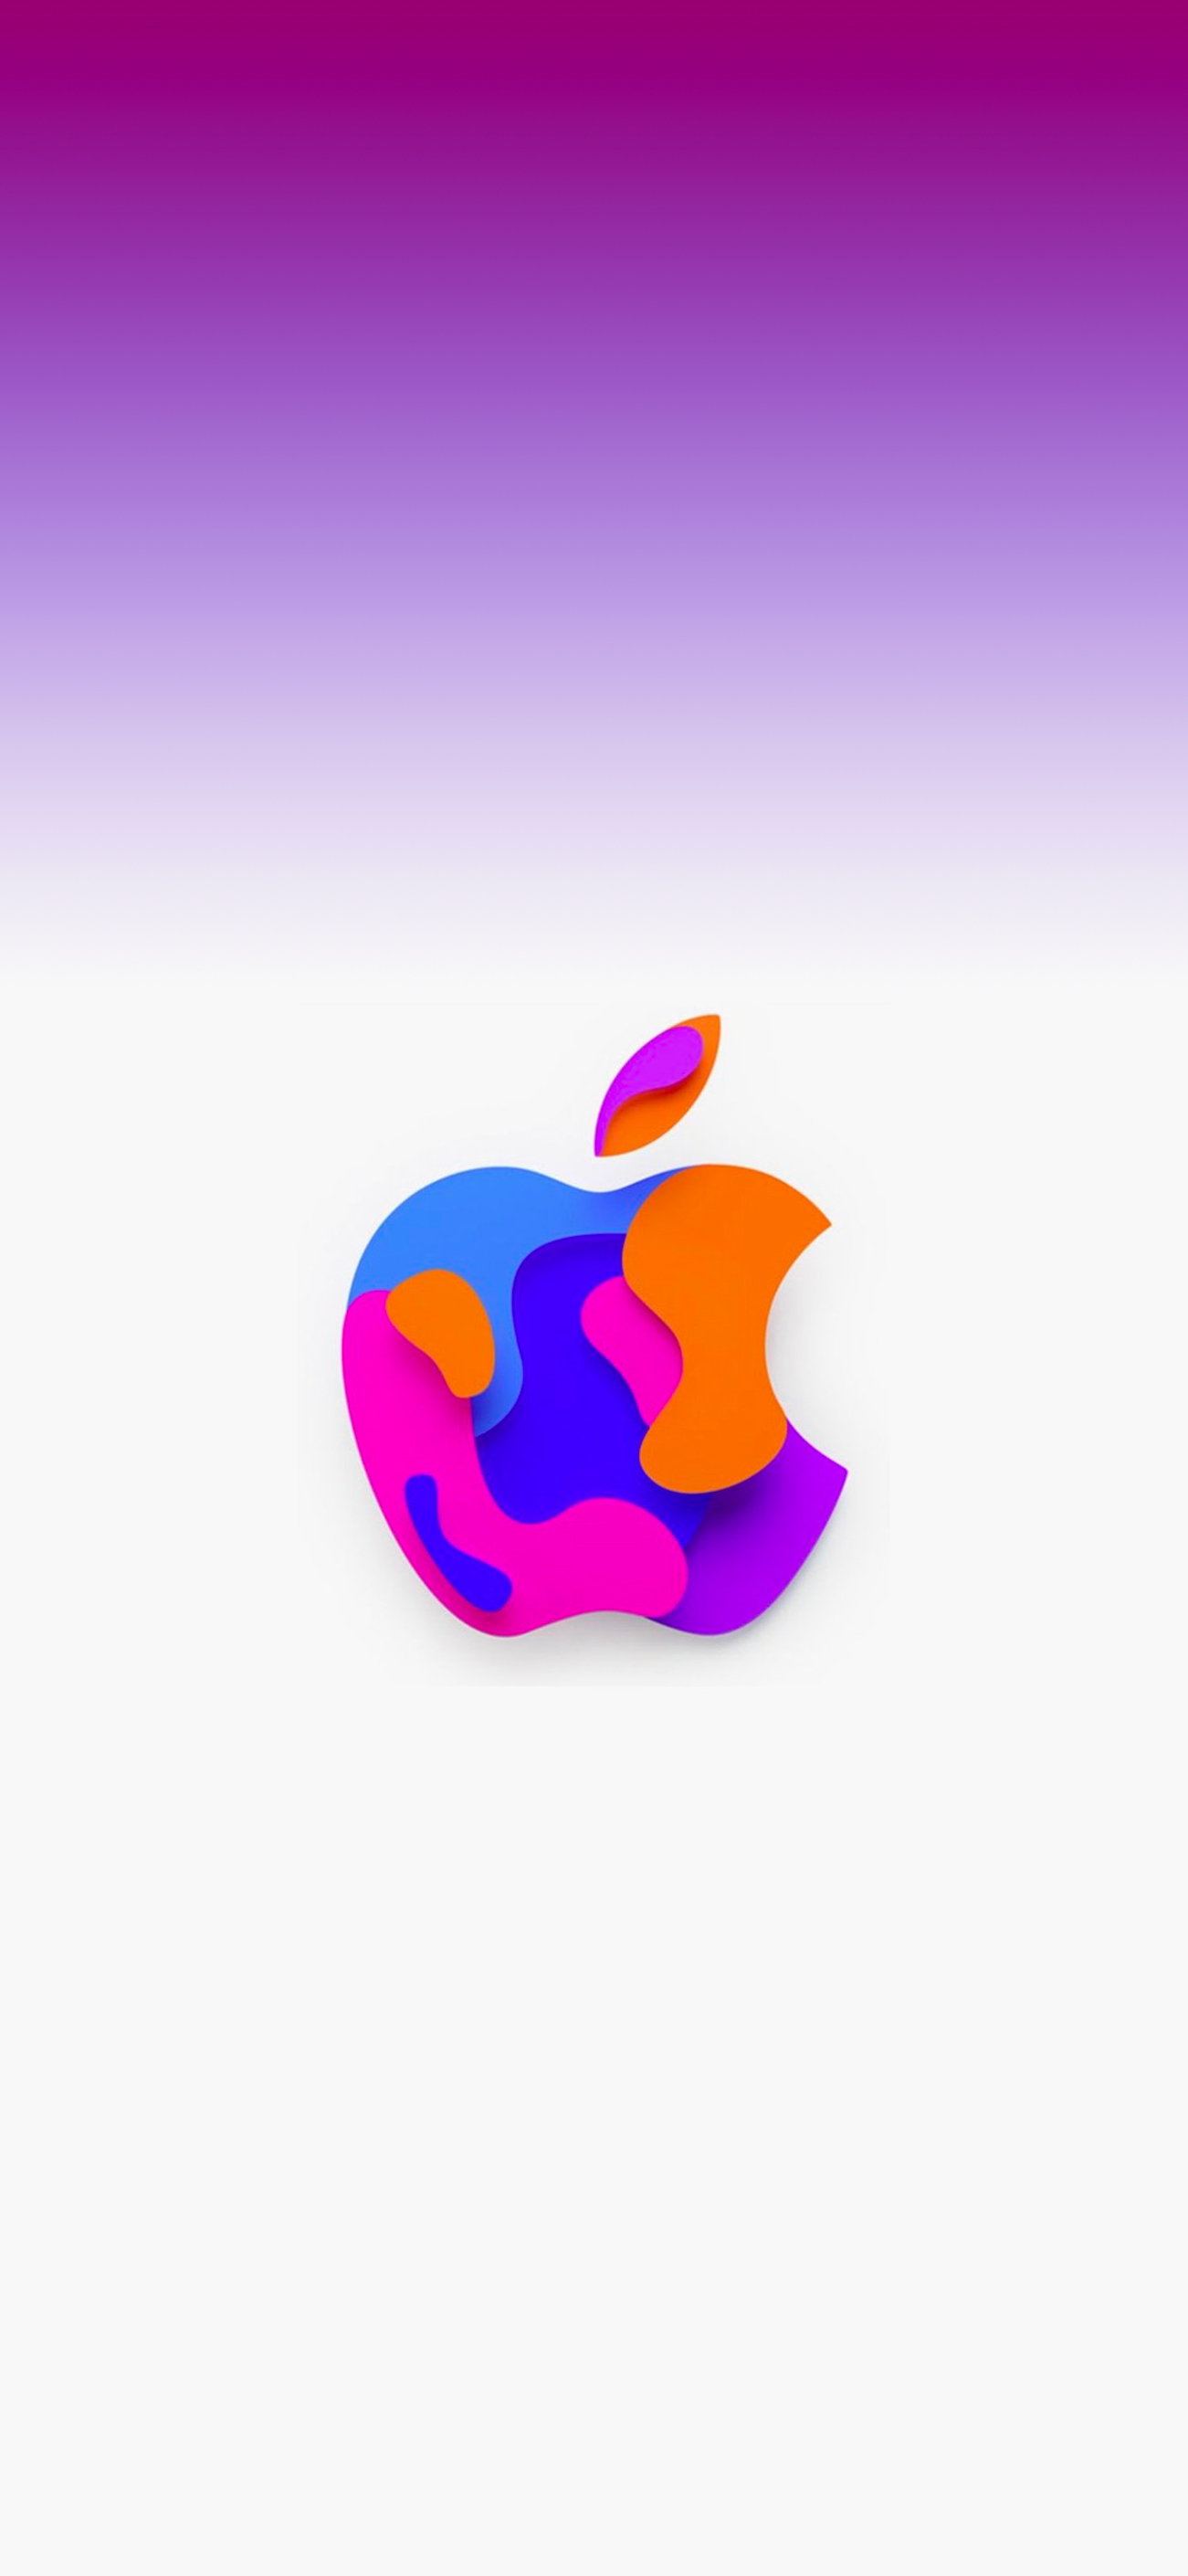 Apple Logo – 30 October Event – Official Wallpaper #26 - Wallpapers Central